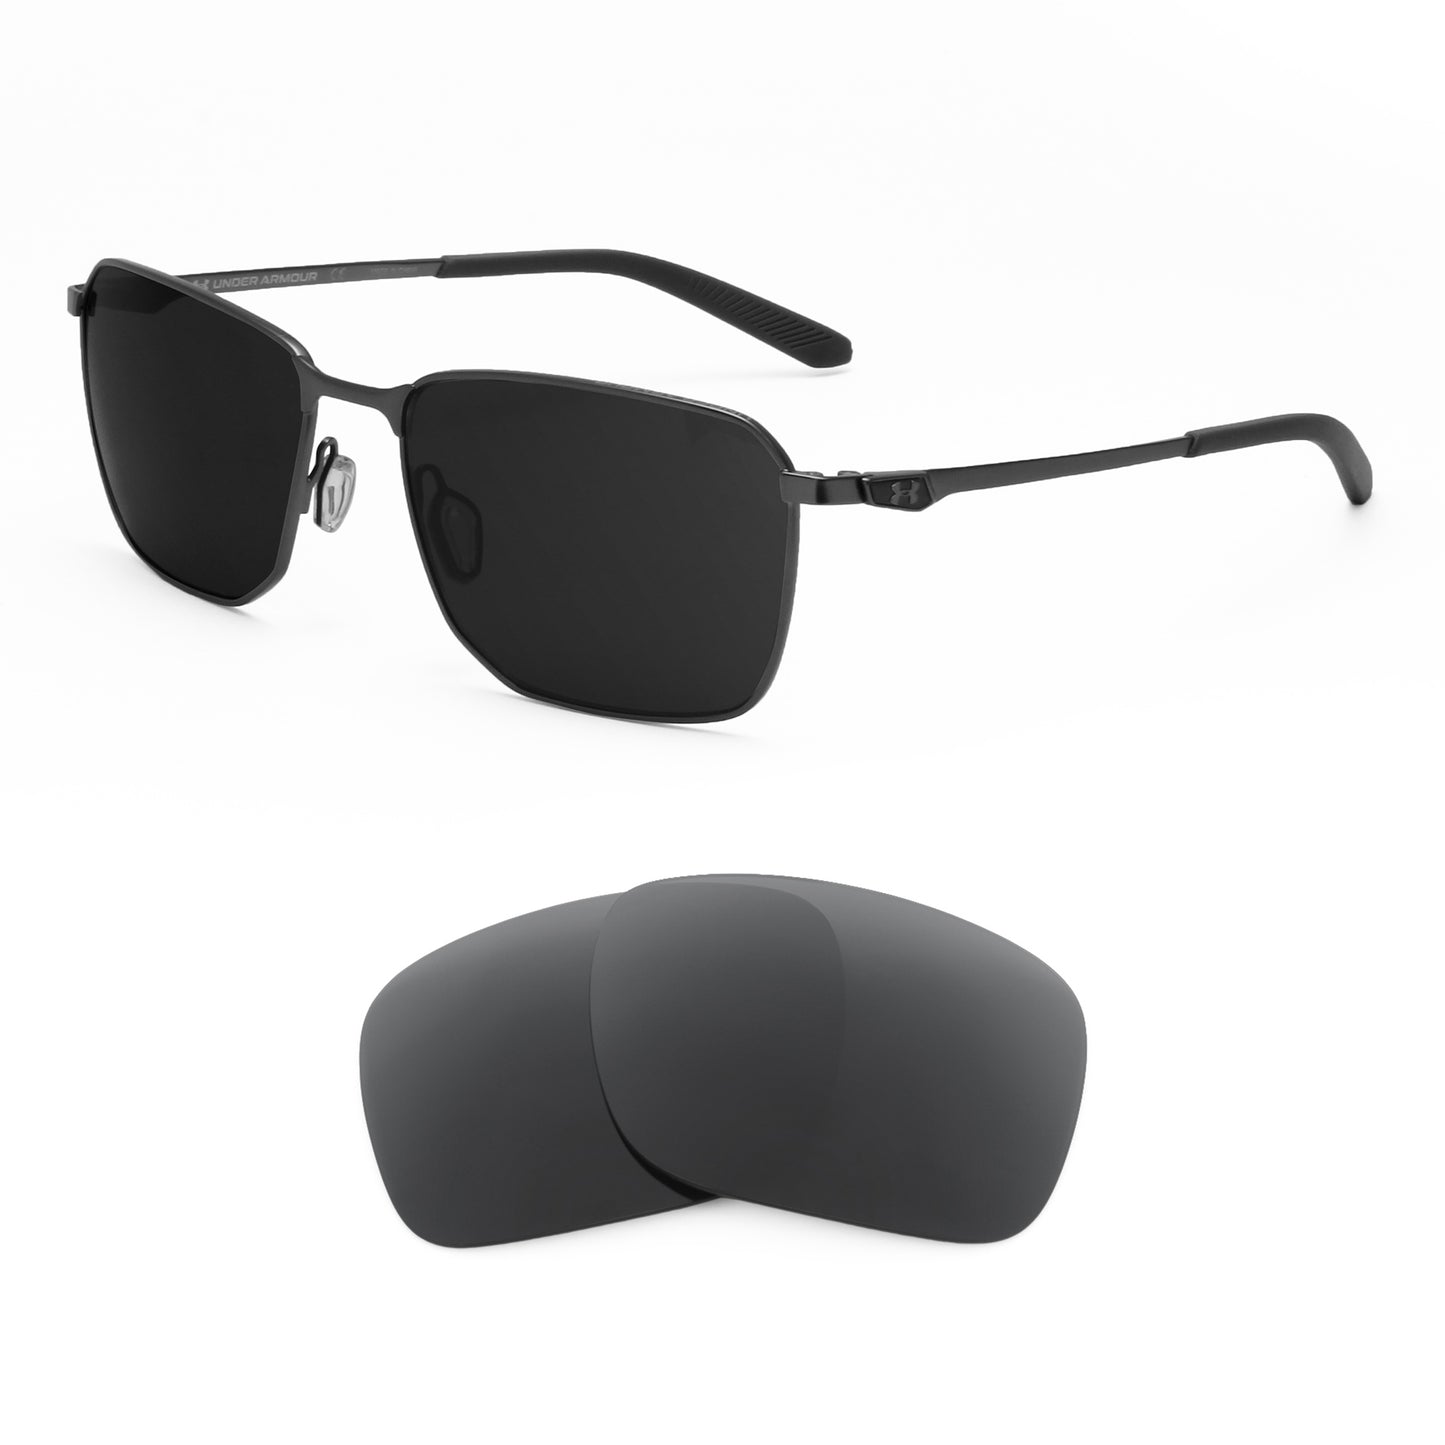 Under Armour Scepter 2 sunglasses with replacement lenses